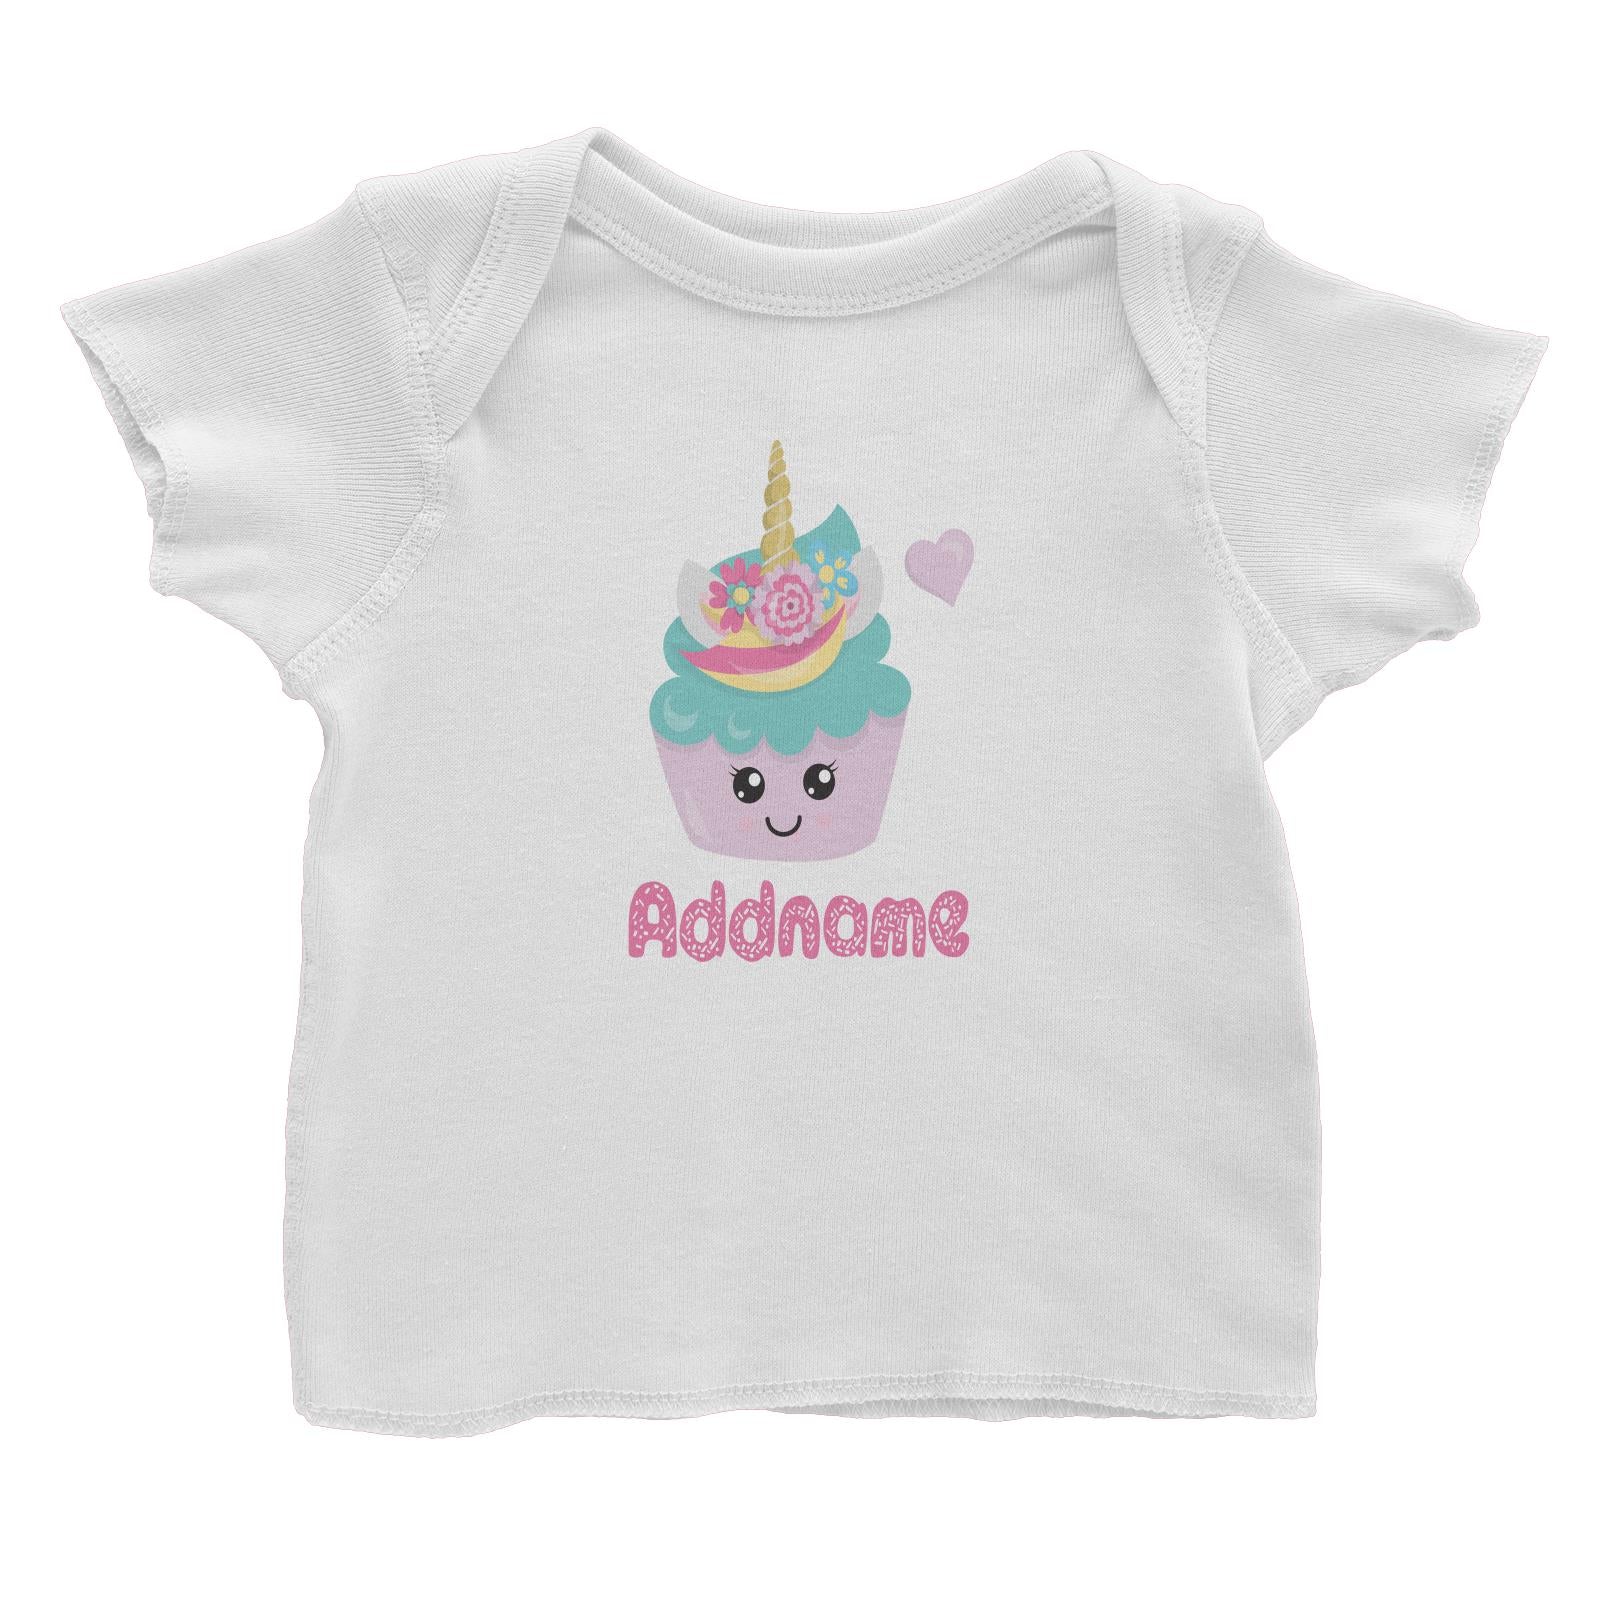 Magical Sweets Purple Cupcake Addname Baby T-Shirt